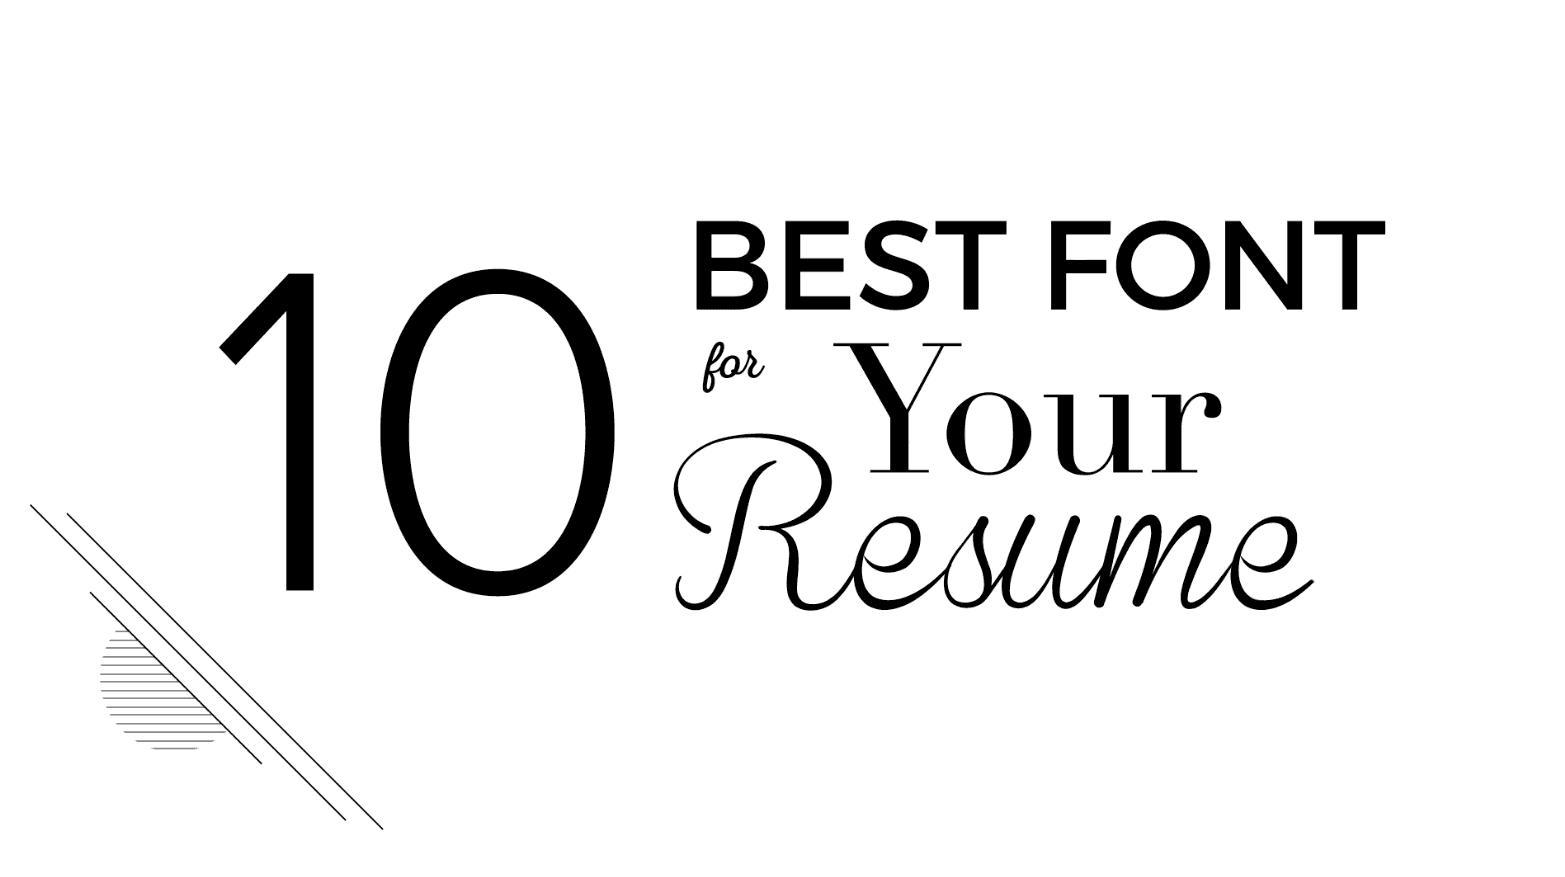 10 Best Font for Your Resume